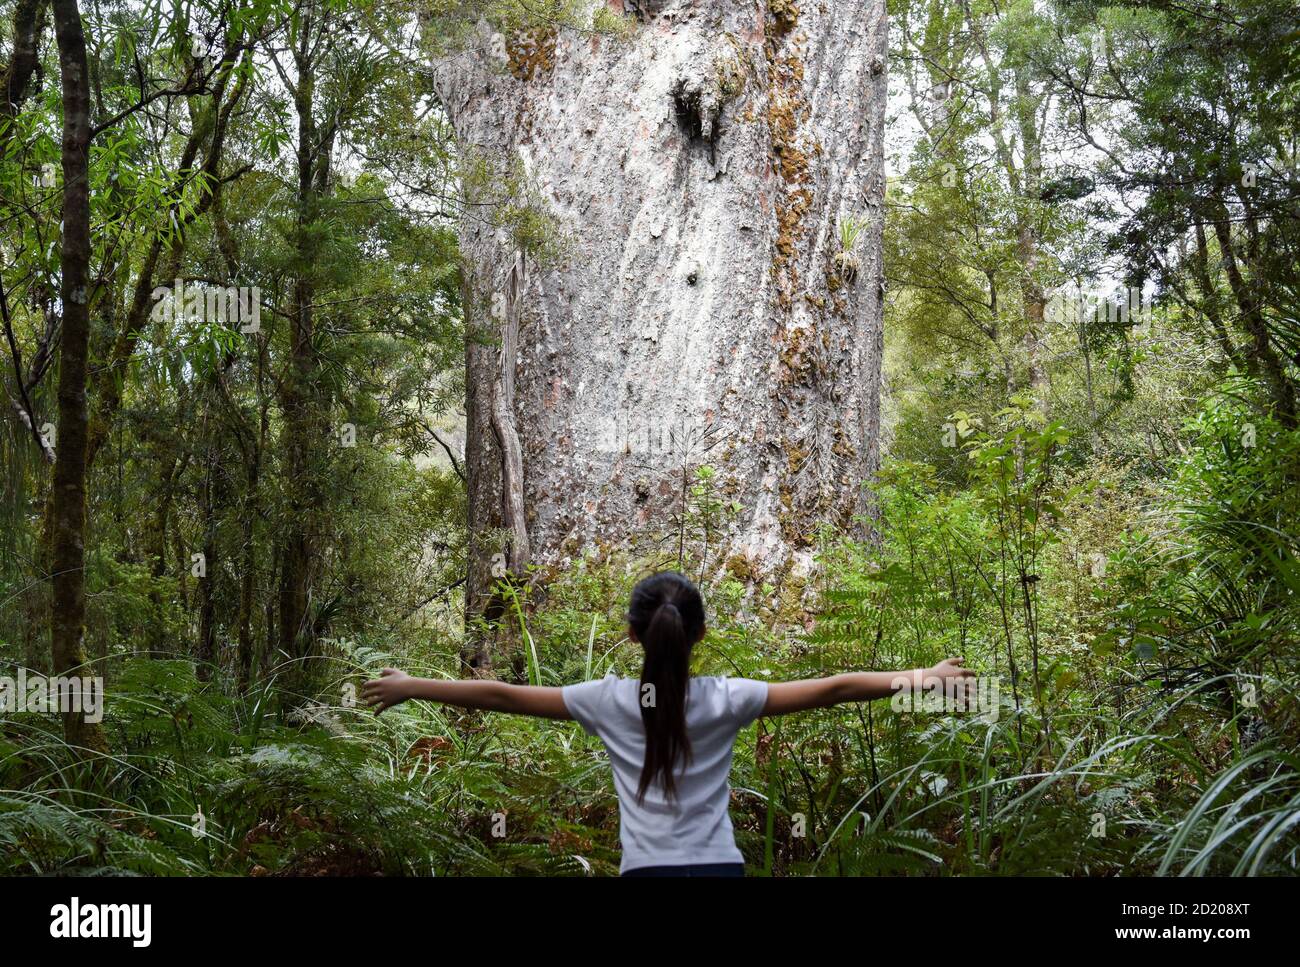 Northland, New Zealand. 6th Oct, 2020. A tourist views a kauri tree at Waipoua forest in Northland, New Zealand, Oct. 6, 2020. Waipoua, and the adjoining forests, make up the largest remaining tract of native forest in Northland as well as the home to the kauri trees. Credit: Guo Lei/Xinhua/Alamy Live News Stock Photo